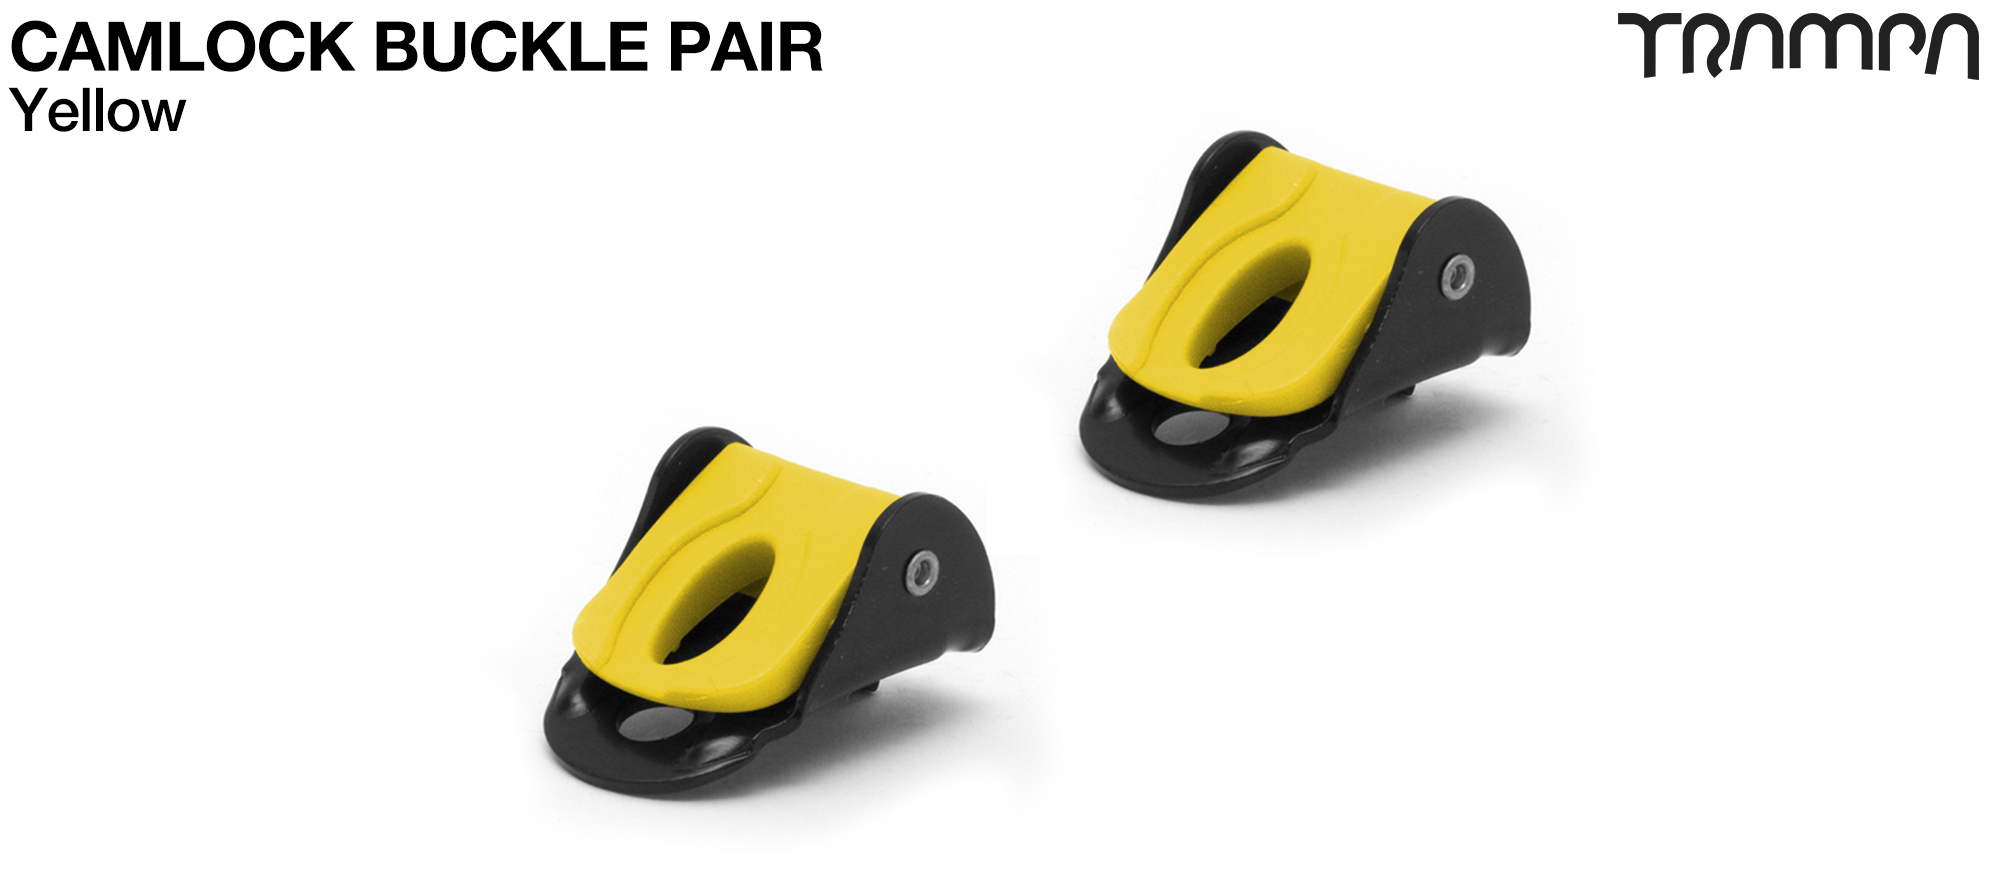 Camlock buckles for foot and heel strap Bindings - YELLOW x 2